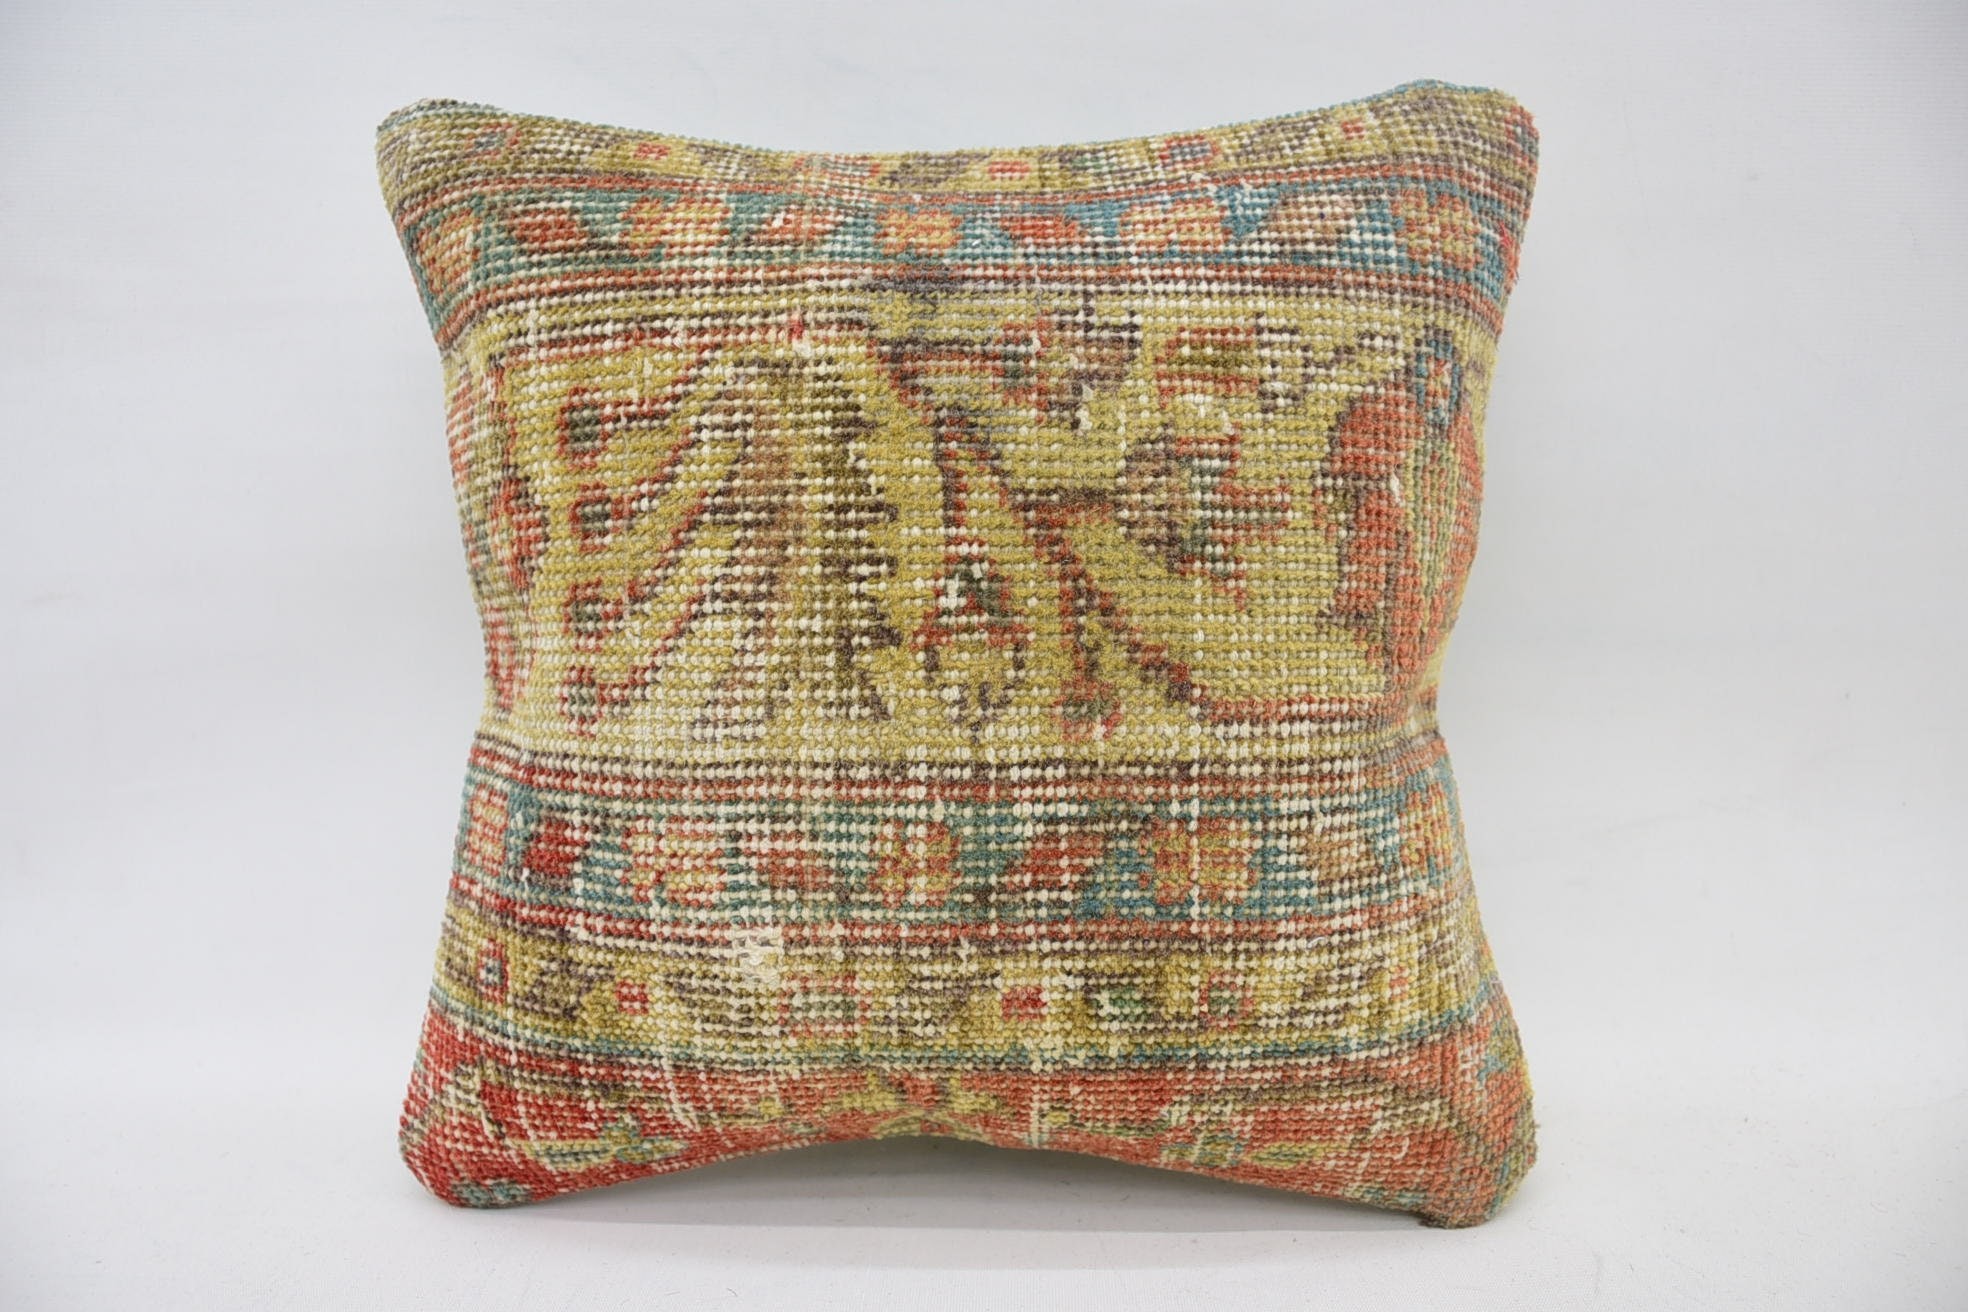 Garden Pillow, Tapestry Pillow Cover, Gift Pillow, Pillow for Couch, 14"x14" Yellow Cushion, Lounge Throw Cushion, Vintage Pillow